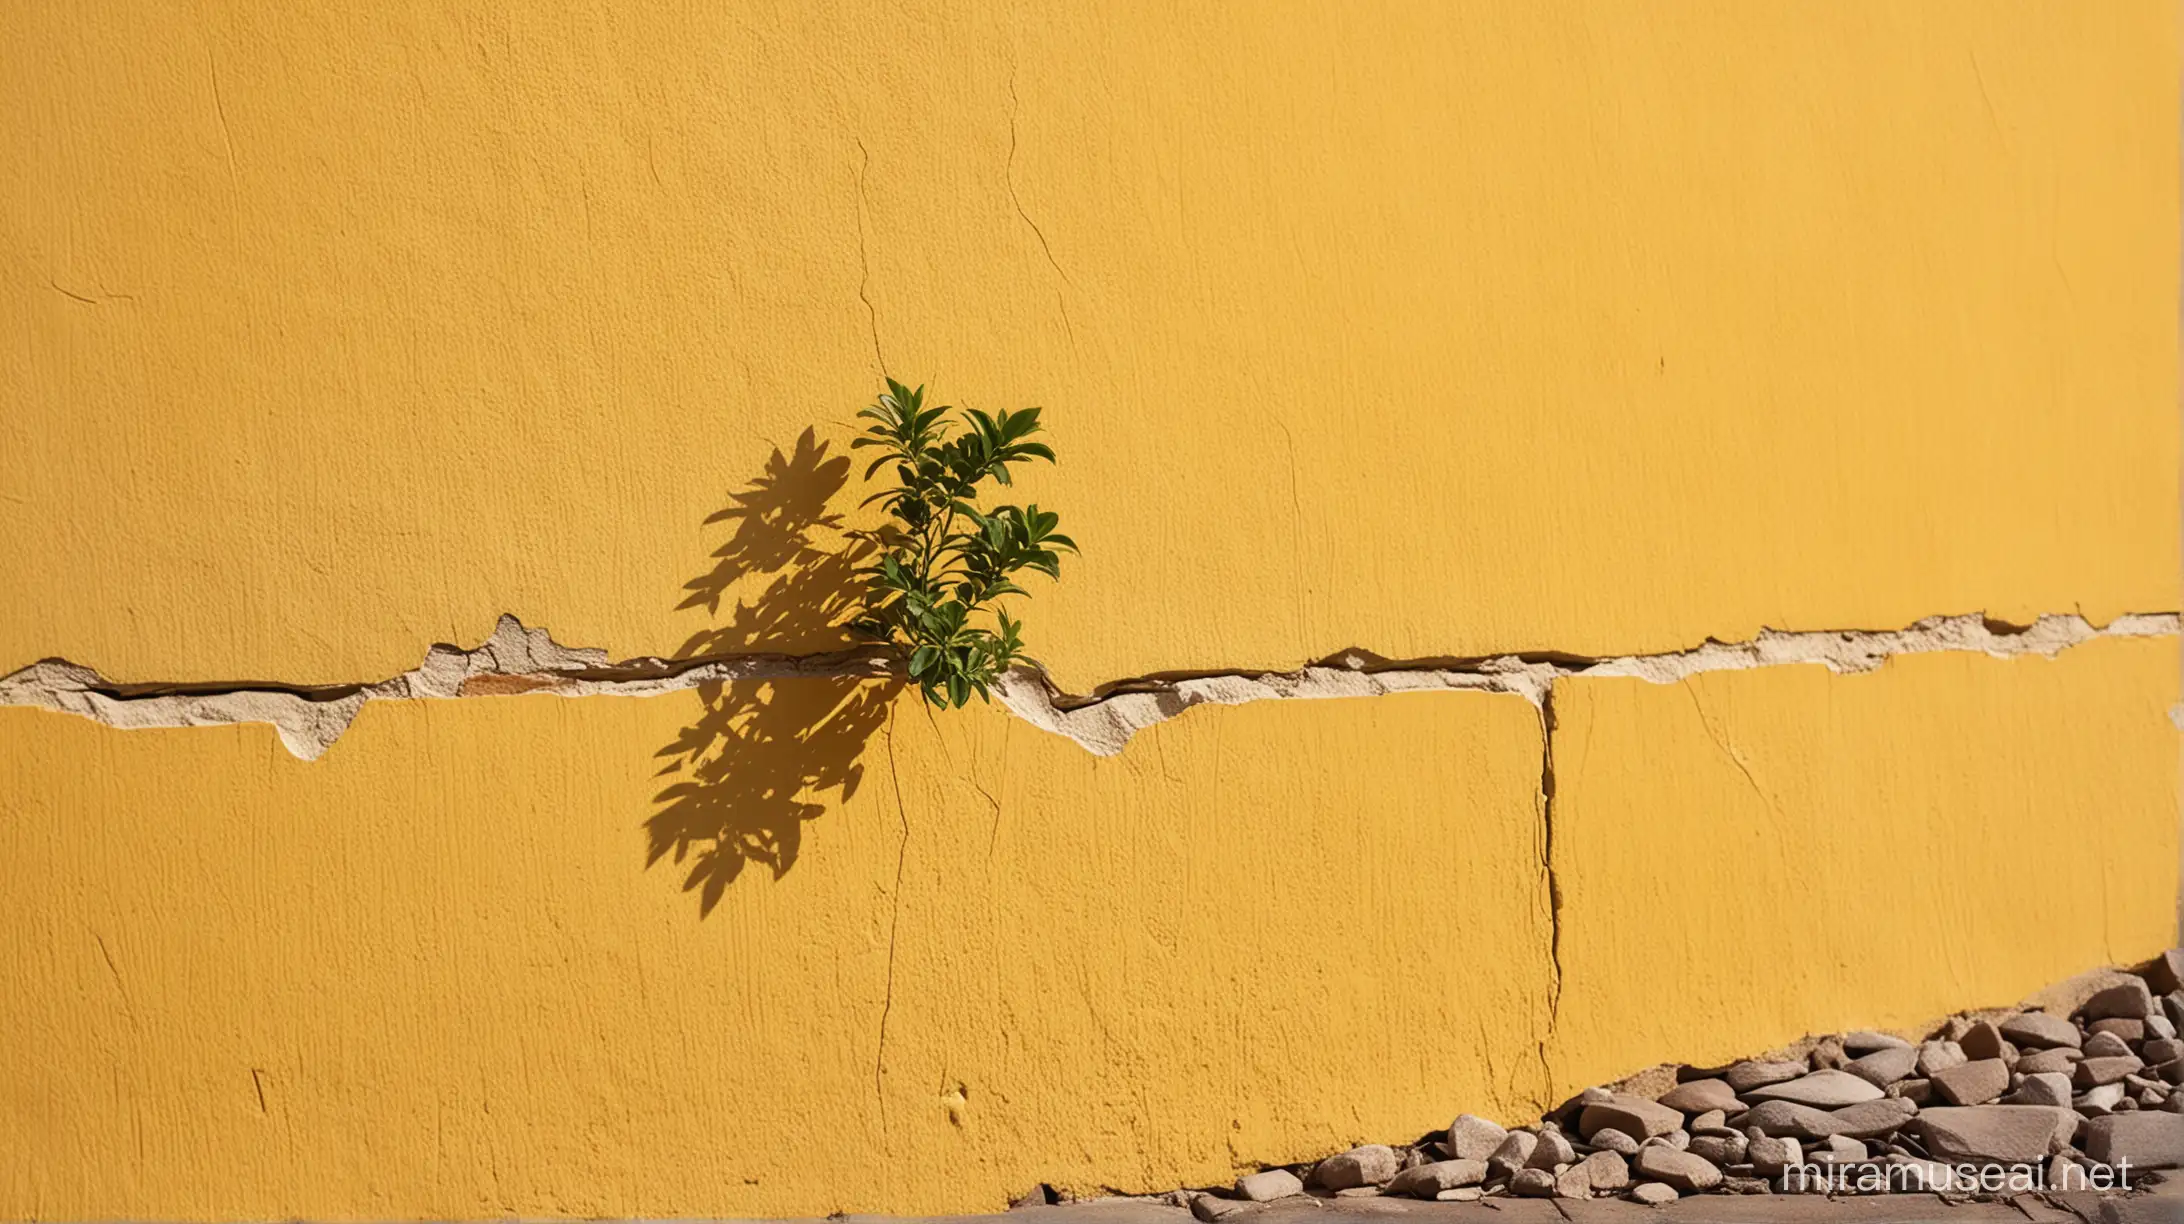 yellow wall with cracks on it, warm welcoming sunlight, small plant merging out from a crack